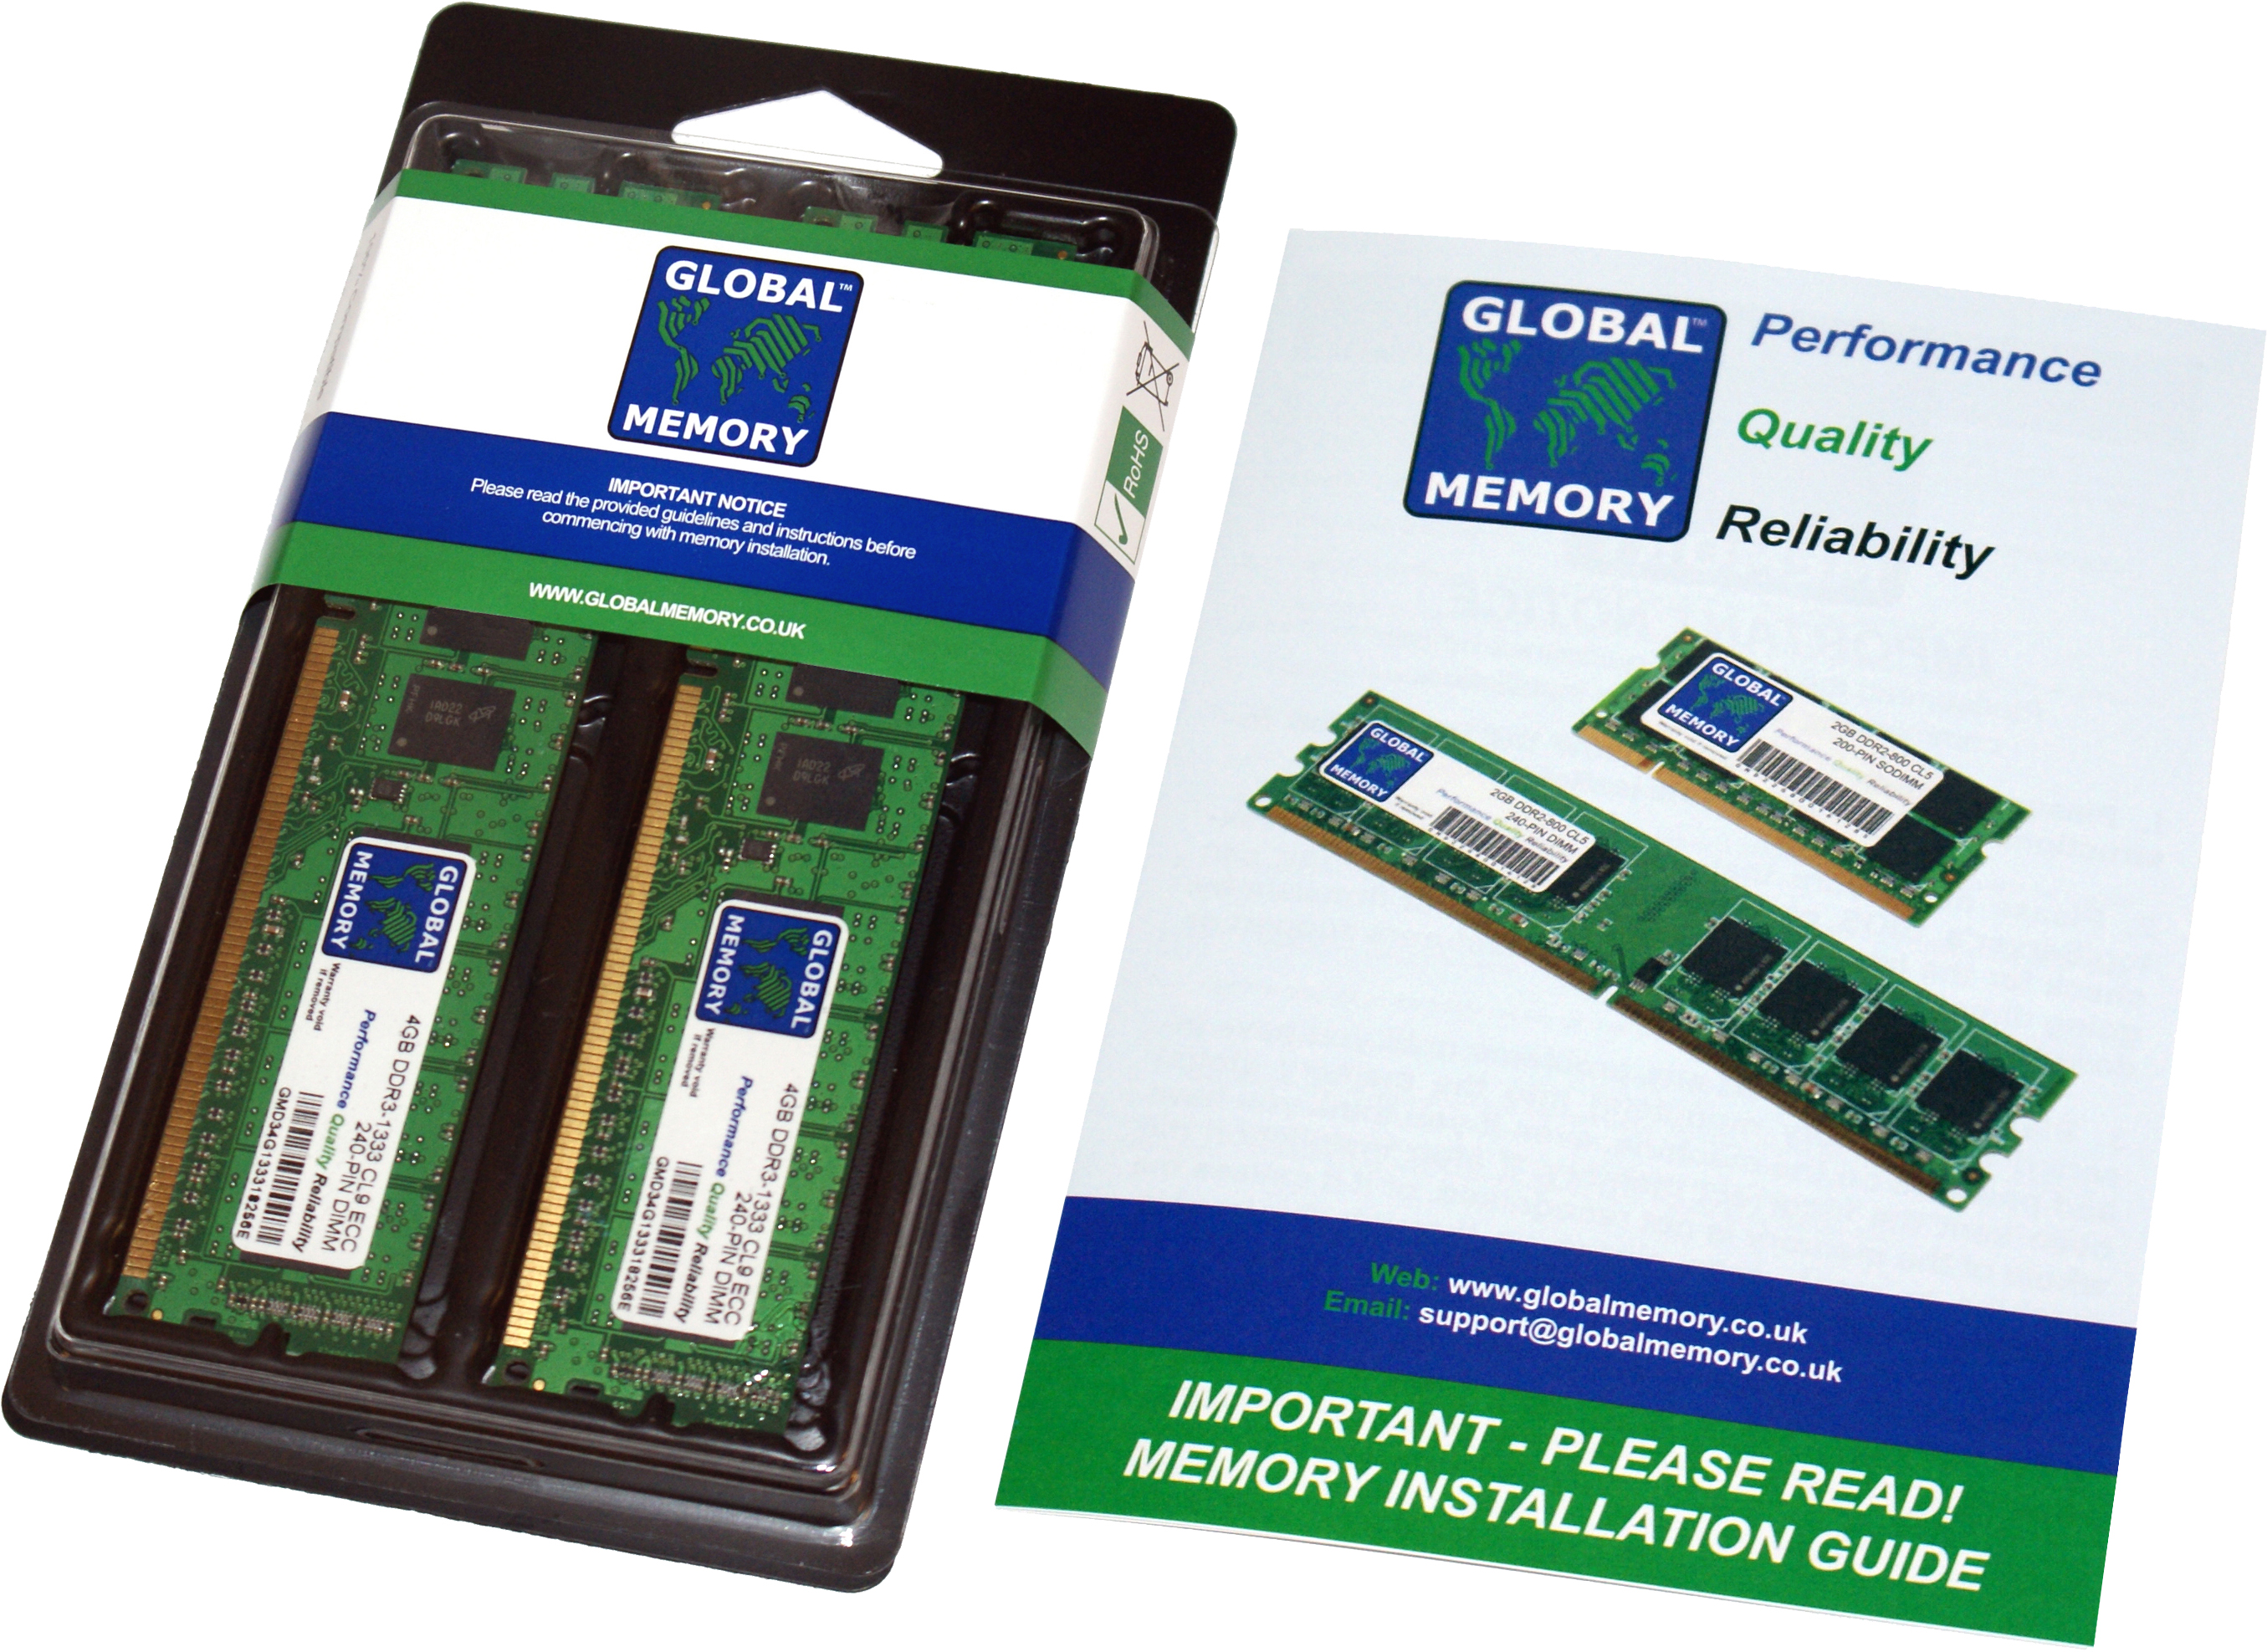 16GB (2 x 8GB) DDR3 1866MHz PC3-14900 240-PIN ECC DIMM (UDIMM) MEMORY RAM KIT FOR SERVERS/WORKSTATIONS/MOTHERBOARDS